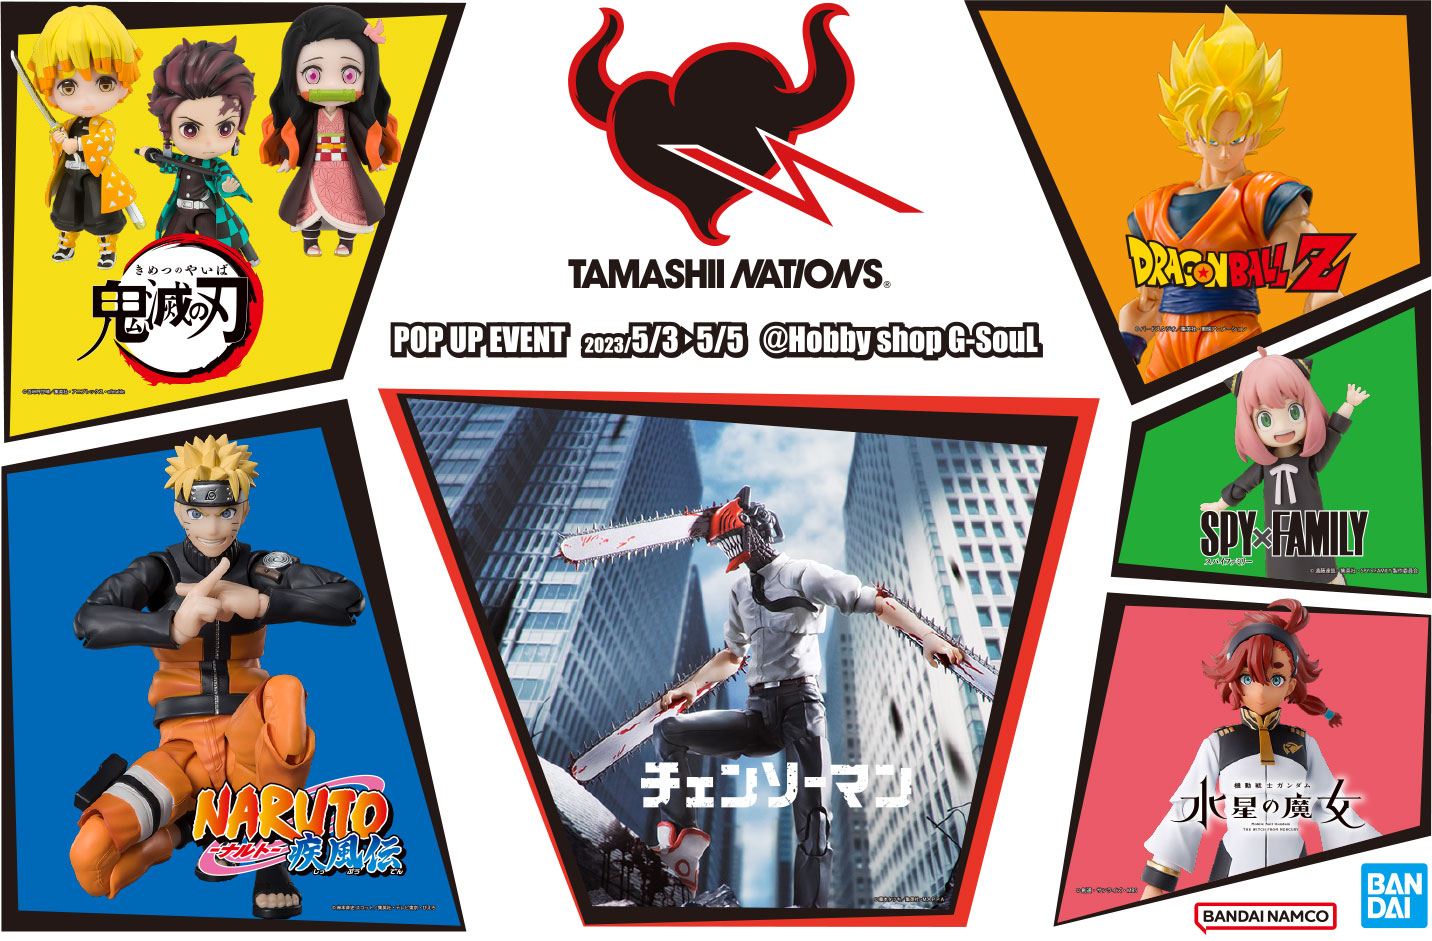 Image of TAMASHII NATIONS POP UP STORE